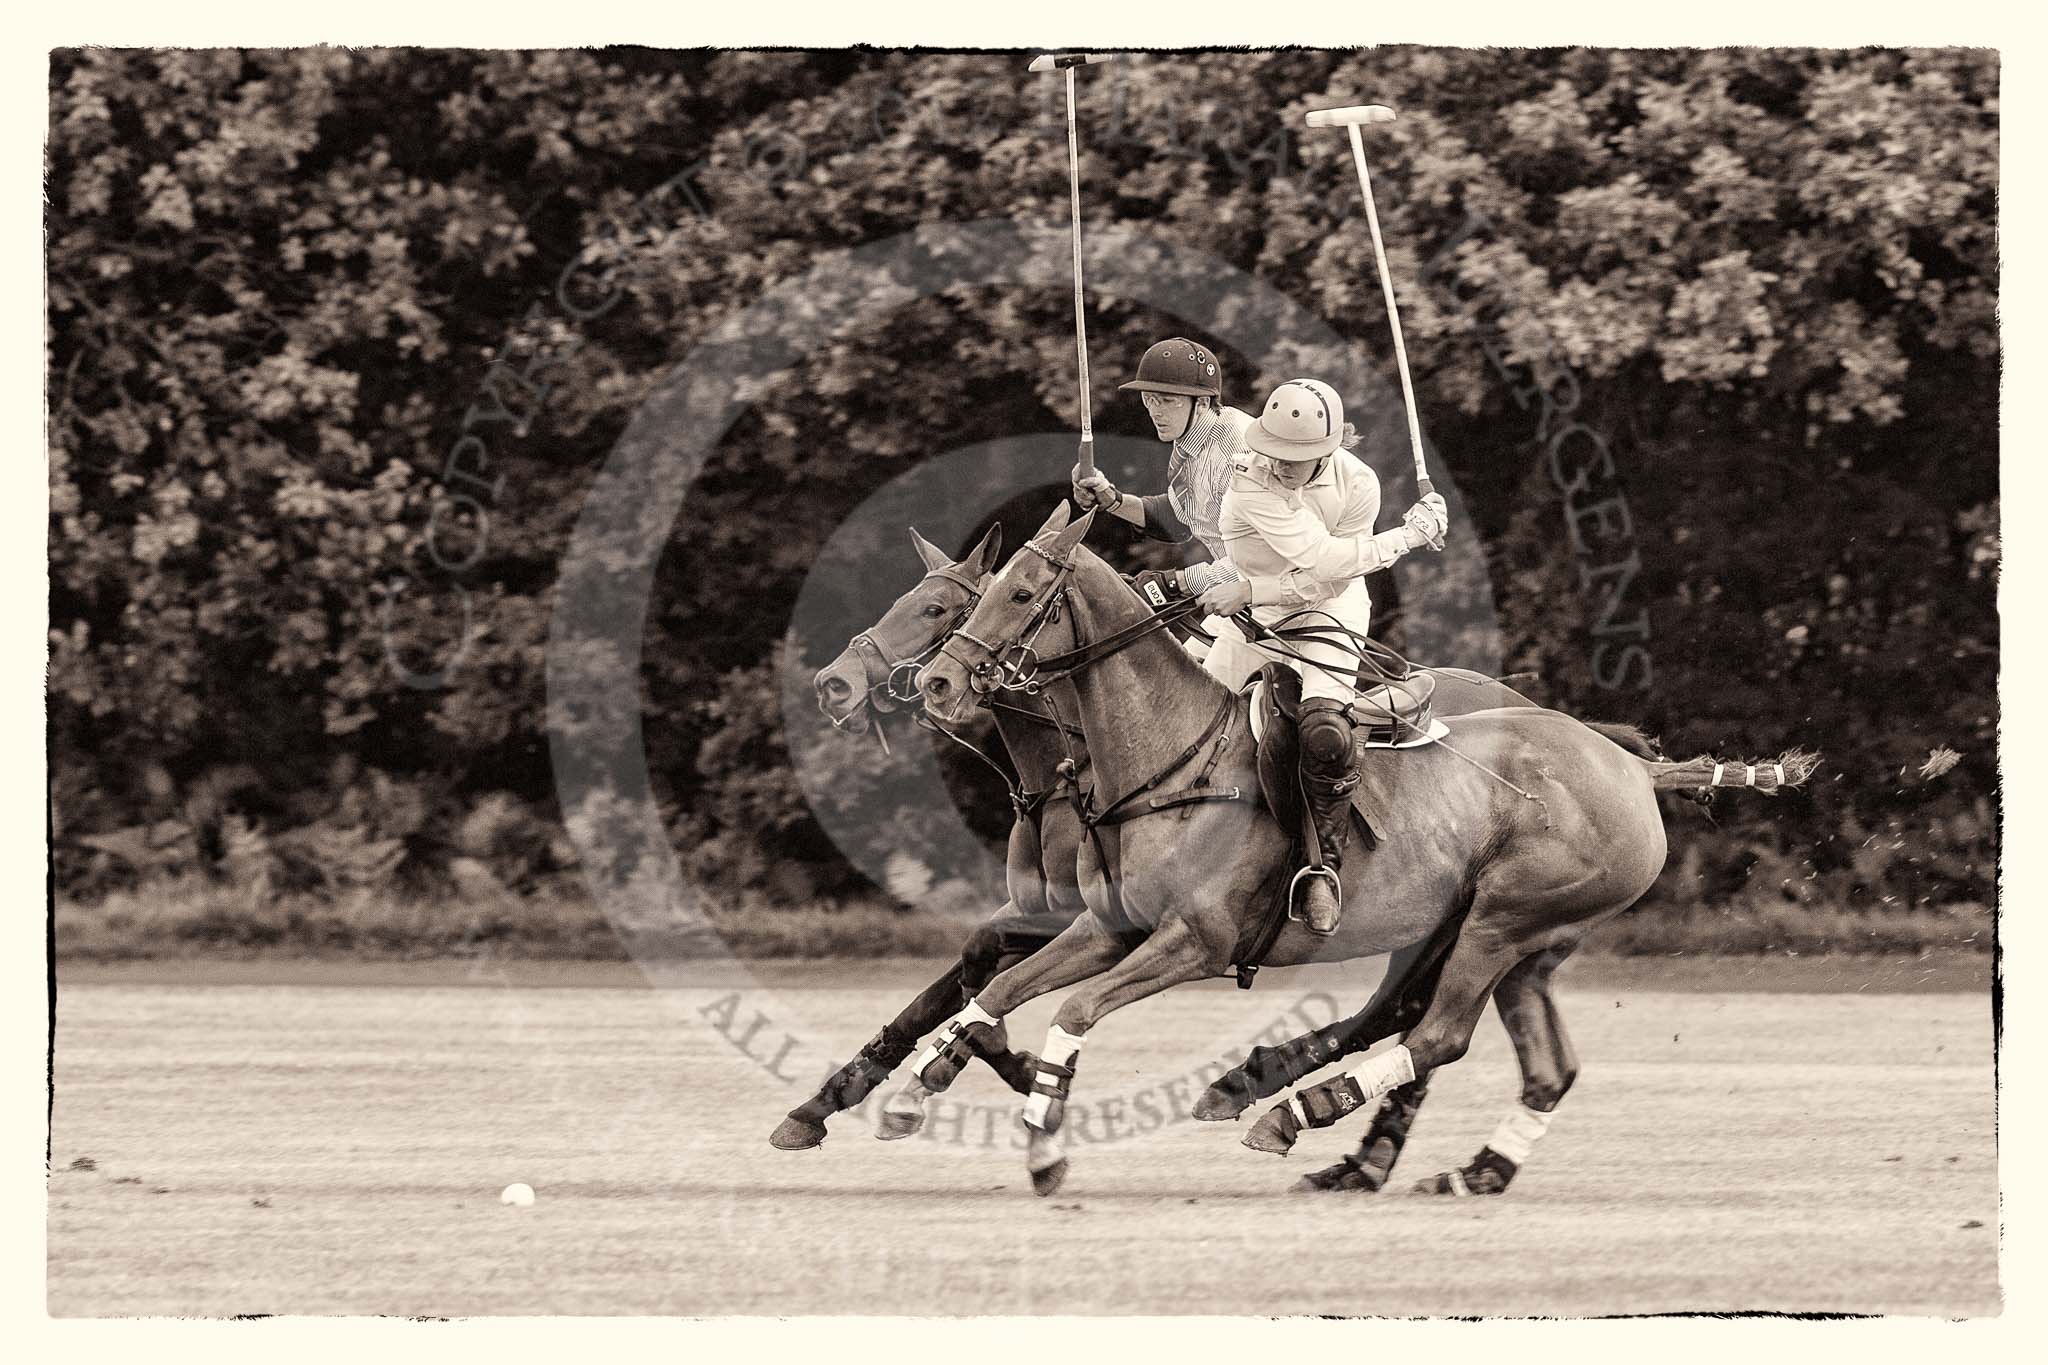 7th Heritage Polo Cup semi-finals: Nico Talamoni in full preparation for a nearside shot..
Hurtwood Park Polo Club,
Ewhurst Green,
Surrey,
United Kingdom,
on 04 August 2012 at 11:10, image #20